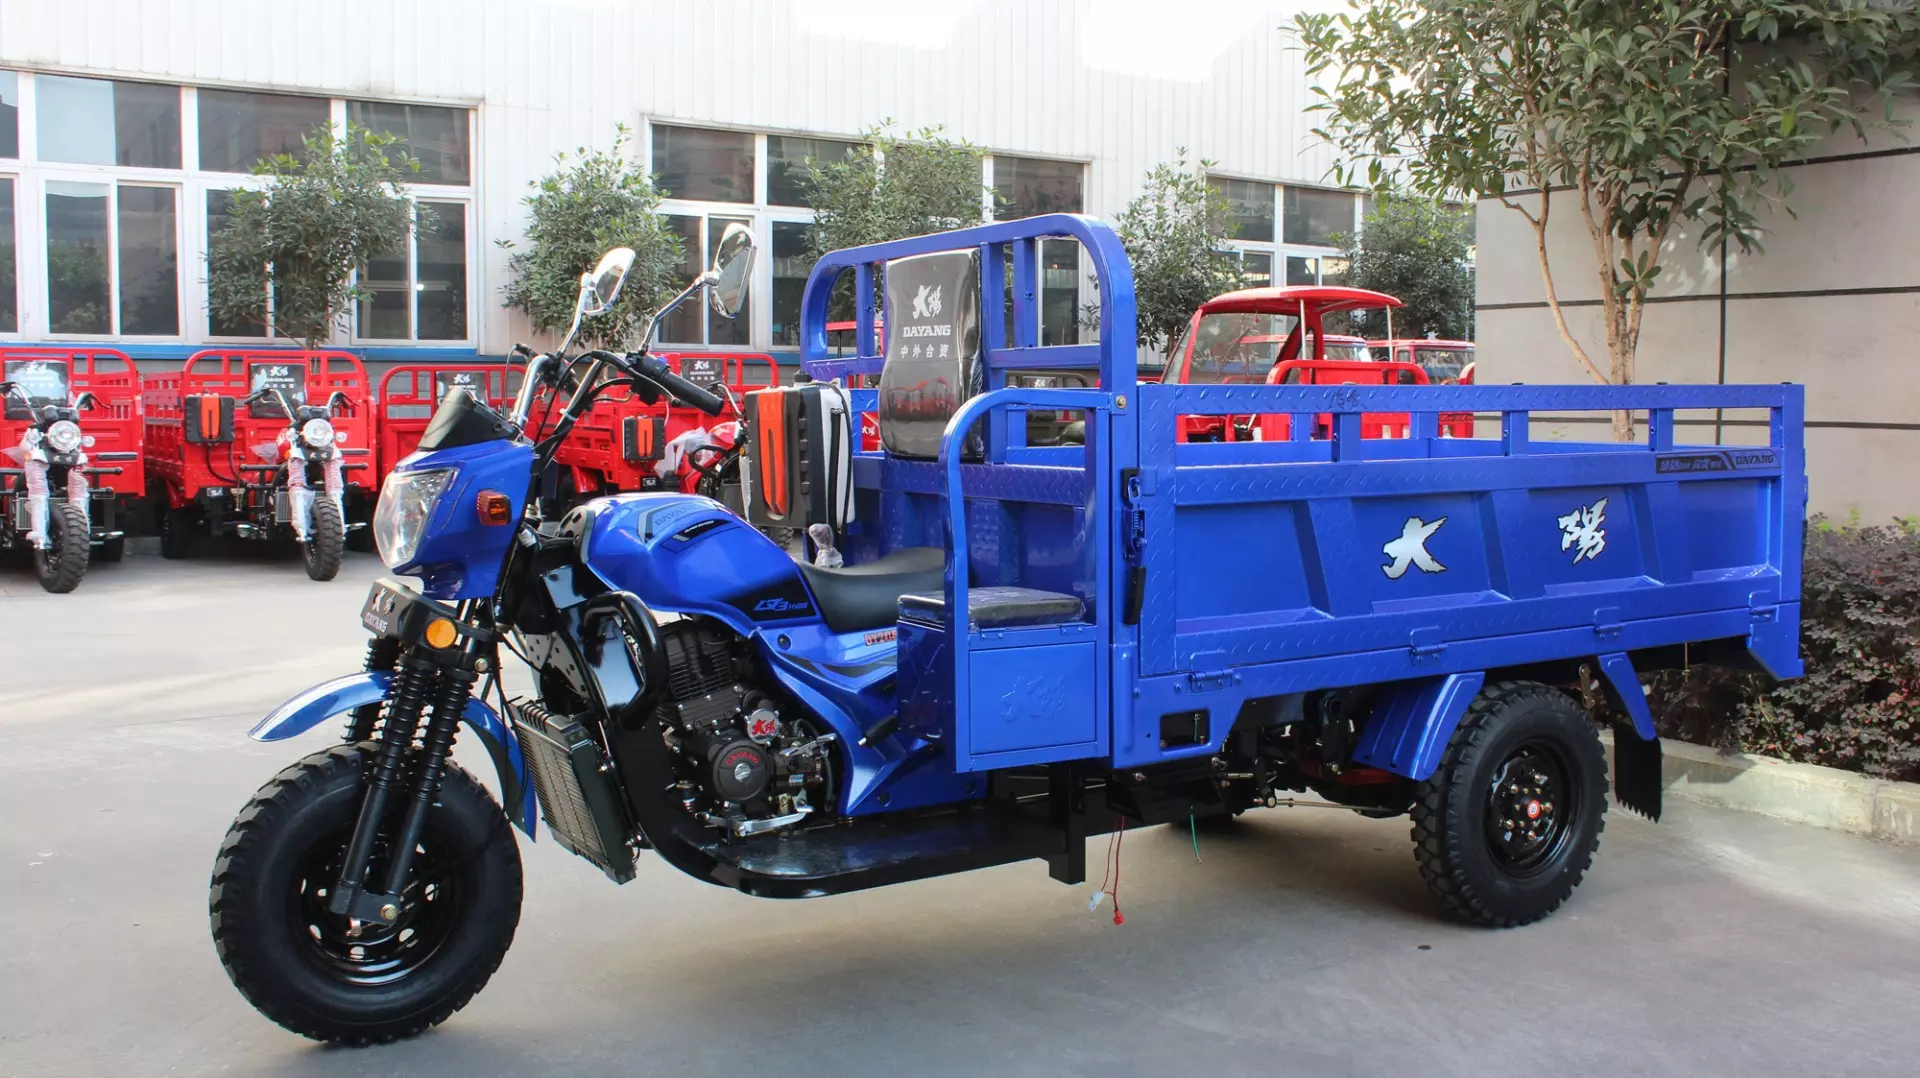 Hot sale adults gasoline three wheels motorcycle powerful cheap zongshen farming truck tricycle cargo